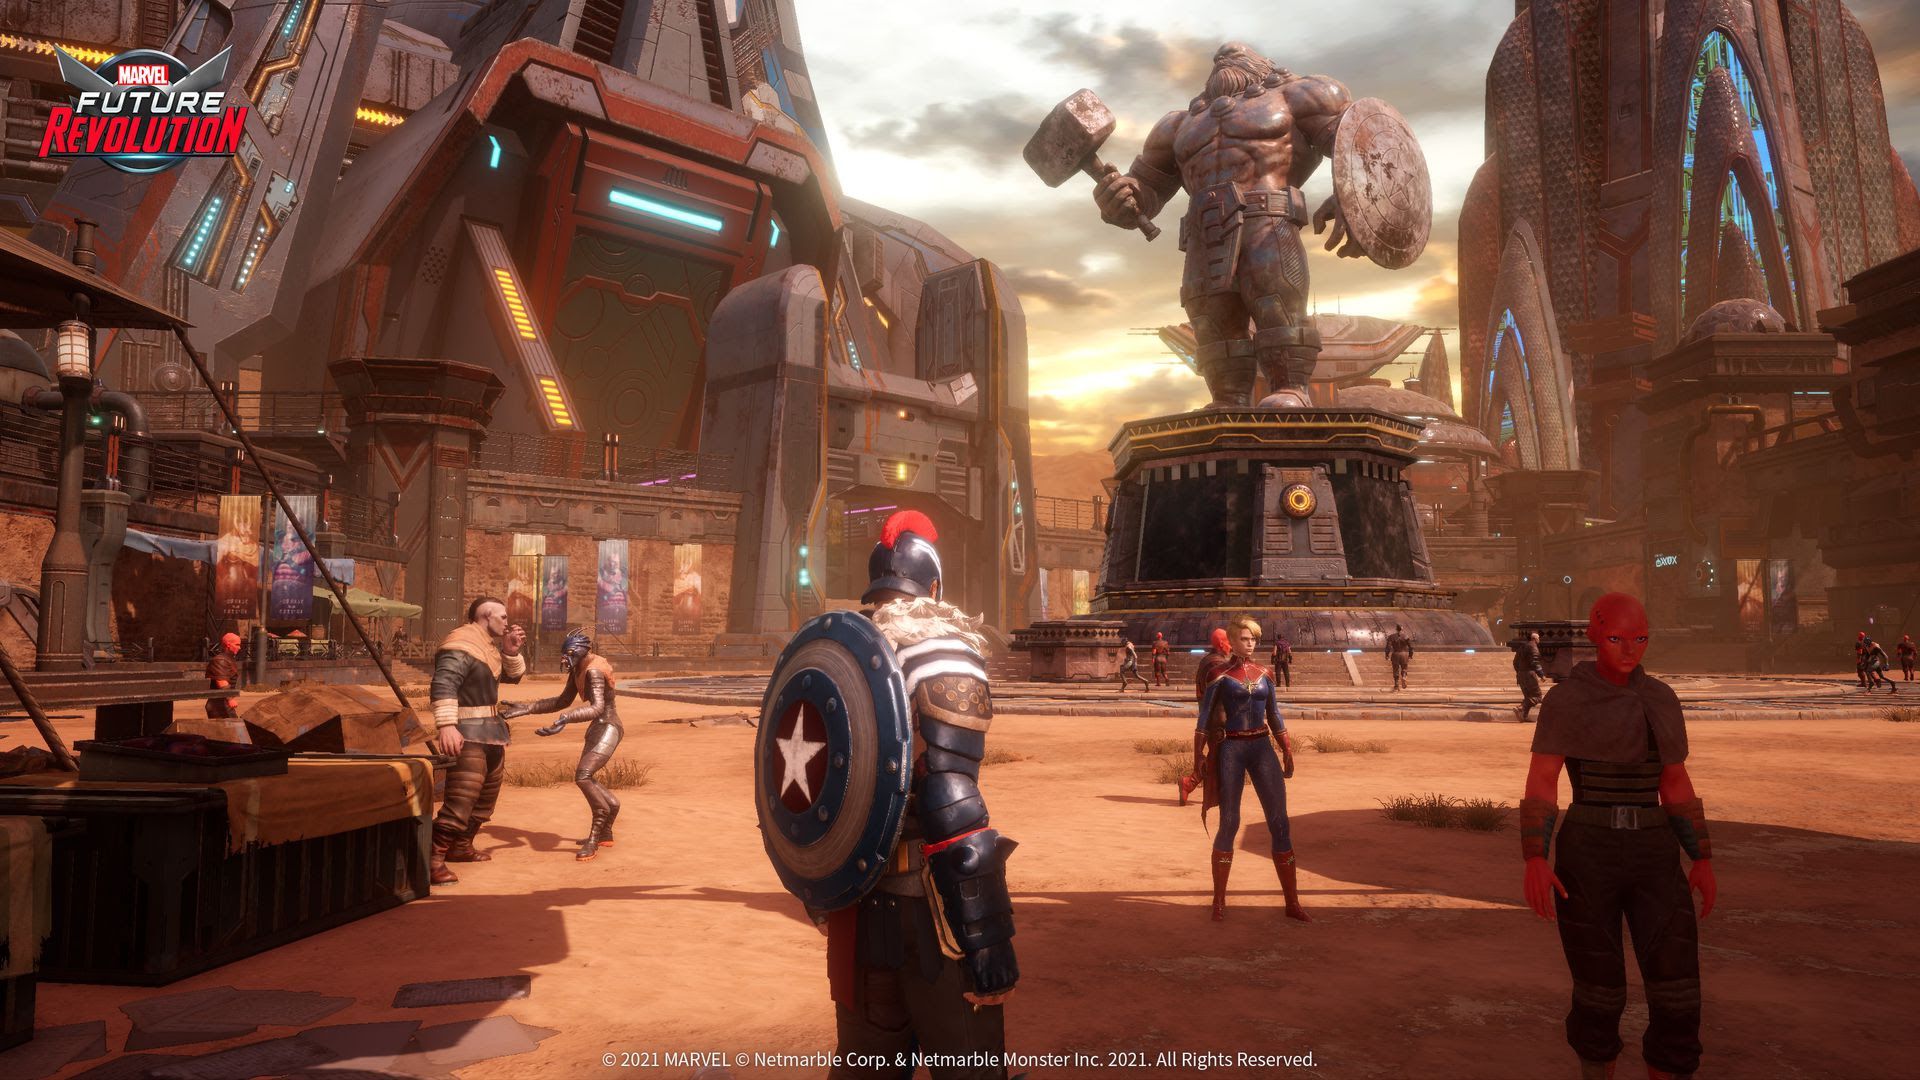 Marvel Heroes PC Game to come to consoles this Spring